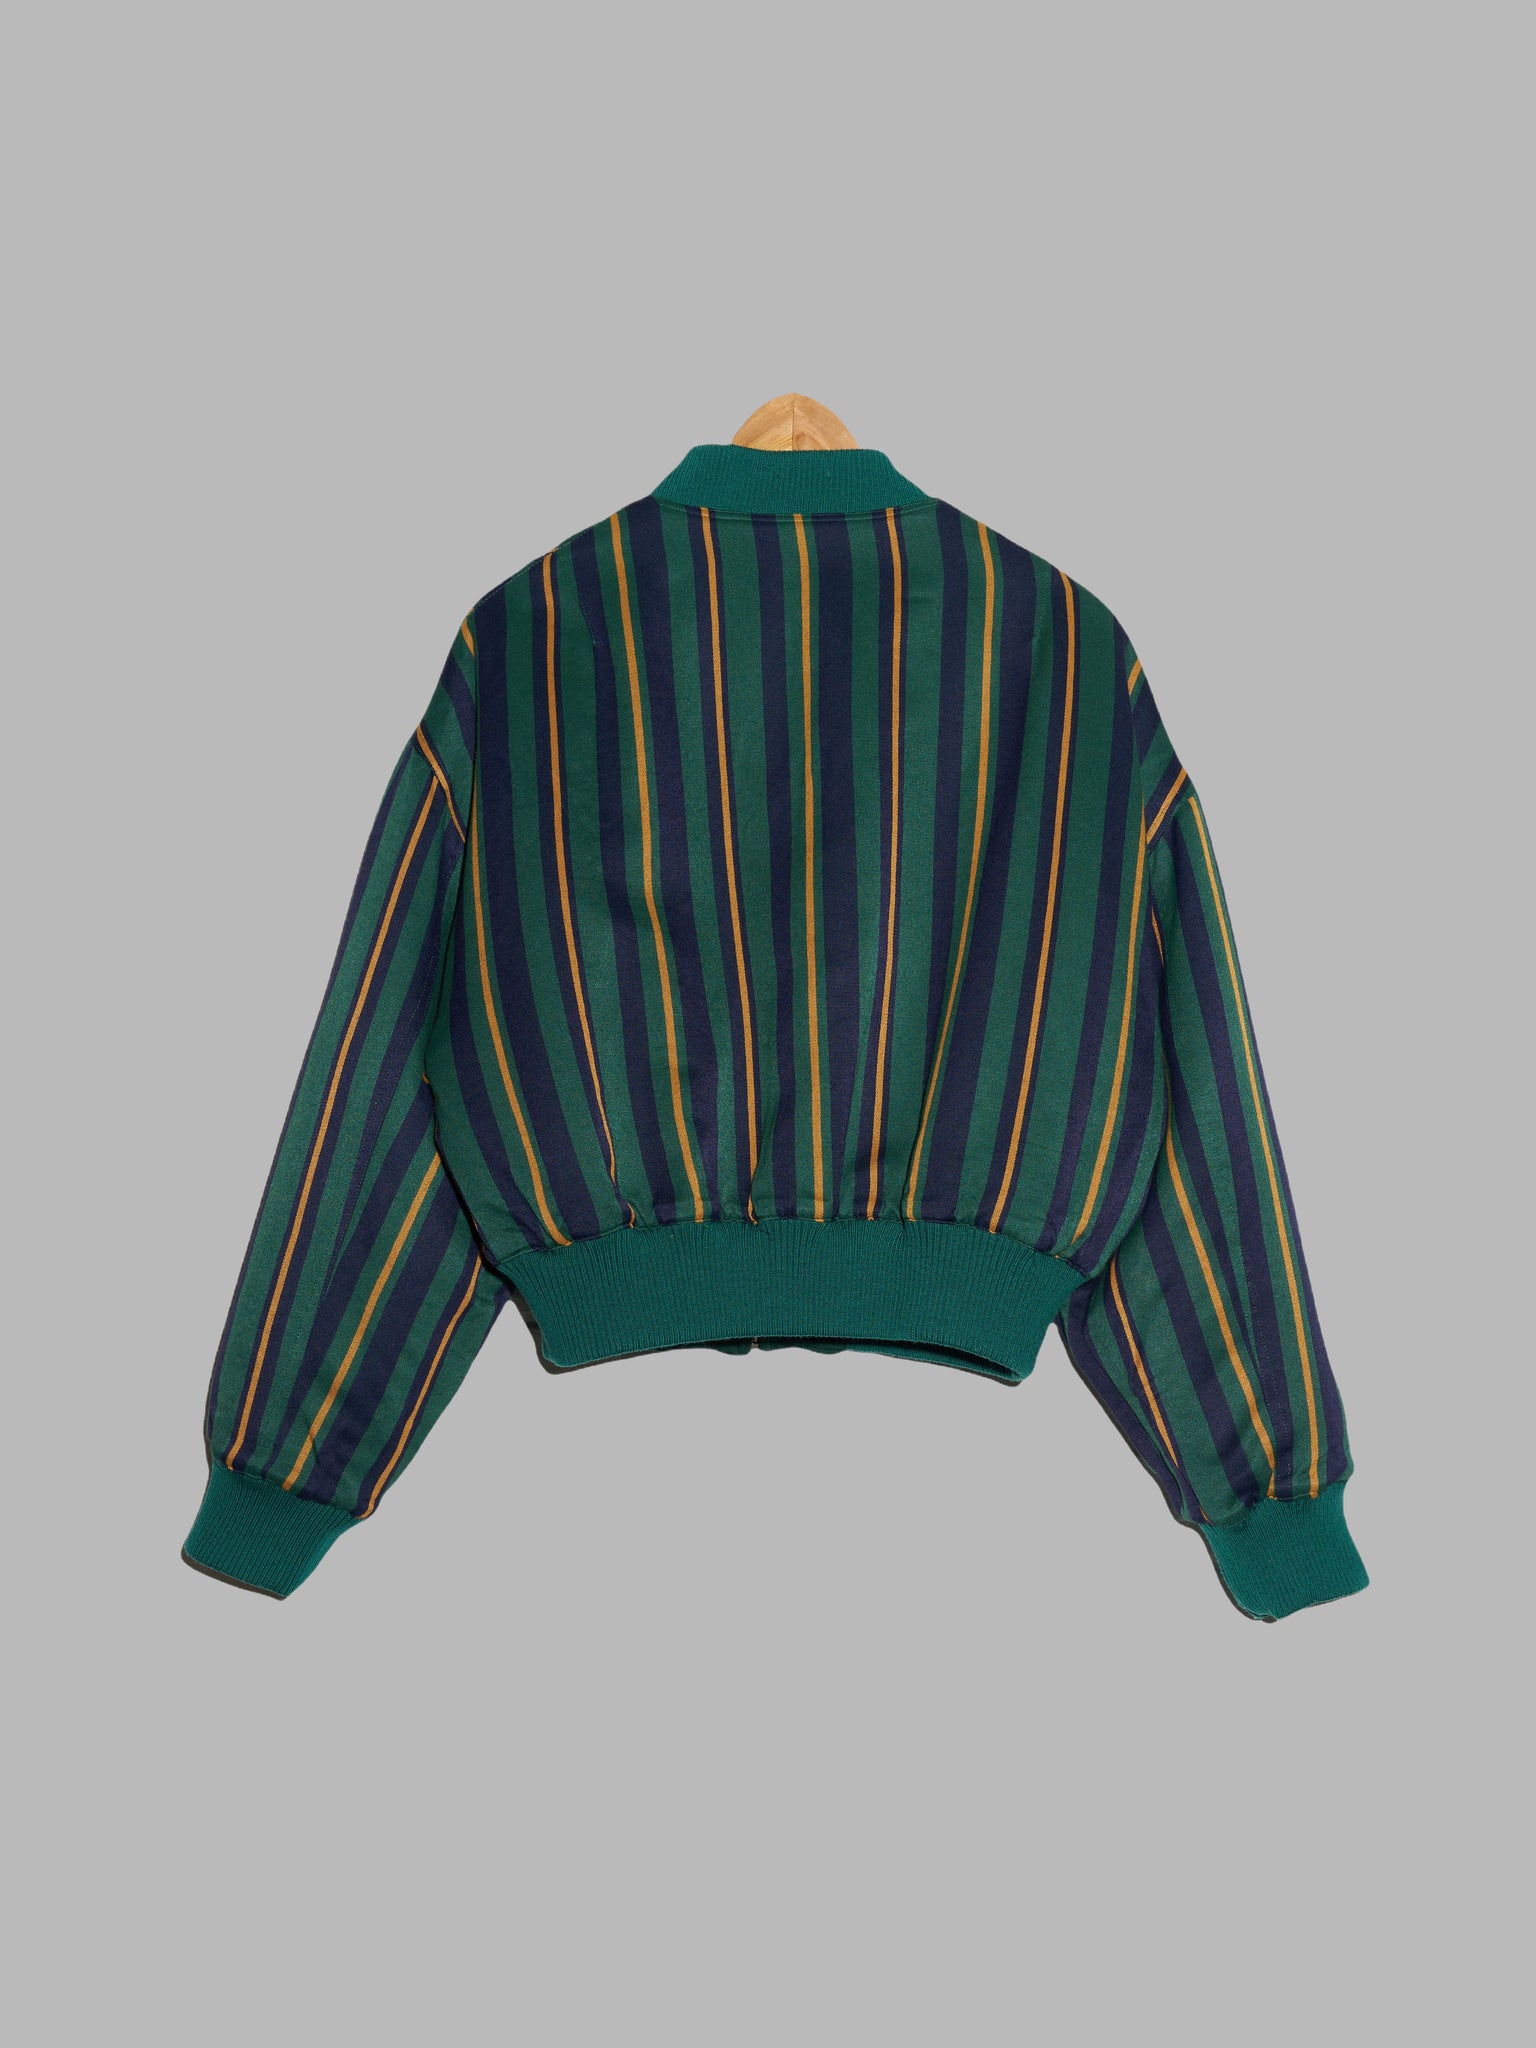 Composition by Kenzo 1980s quilted green reversible striped bomber jacket - 38